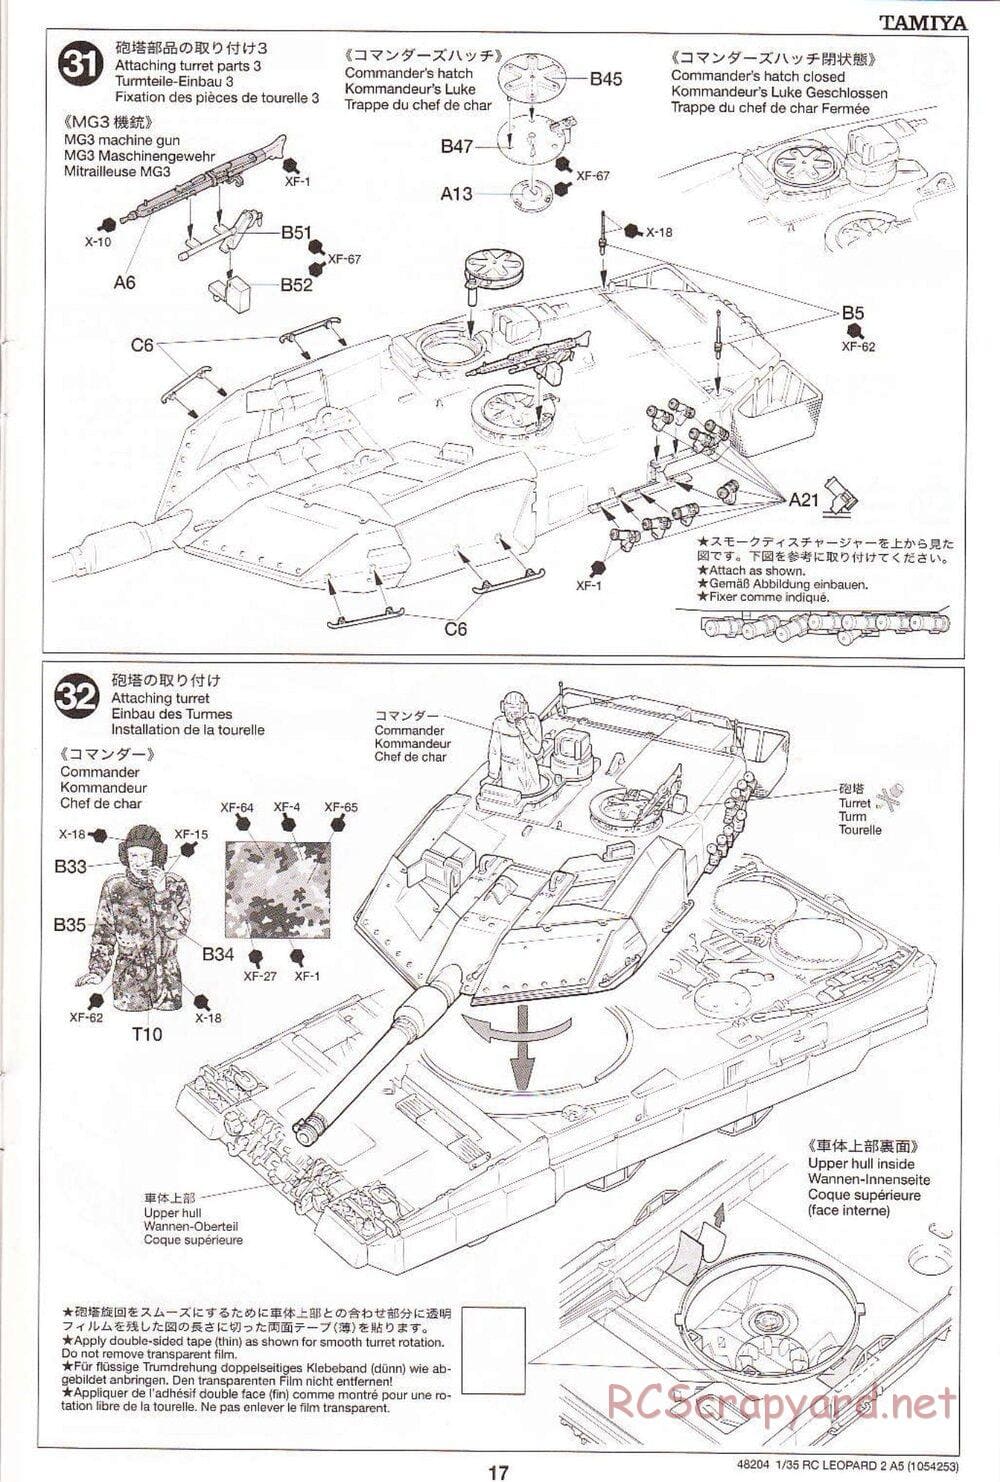 Tamiya - Leopard 2 A5 Main Battle Tank - 1/35 Scale Chassis - Manual - Page 17